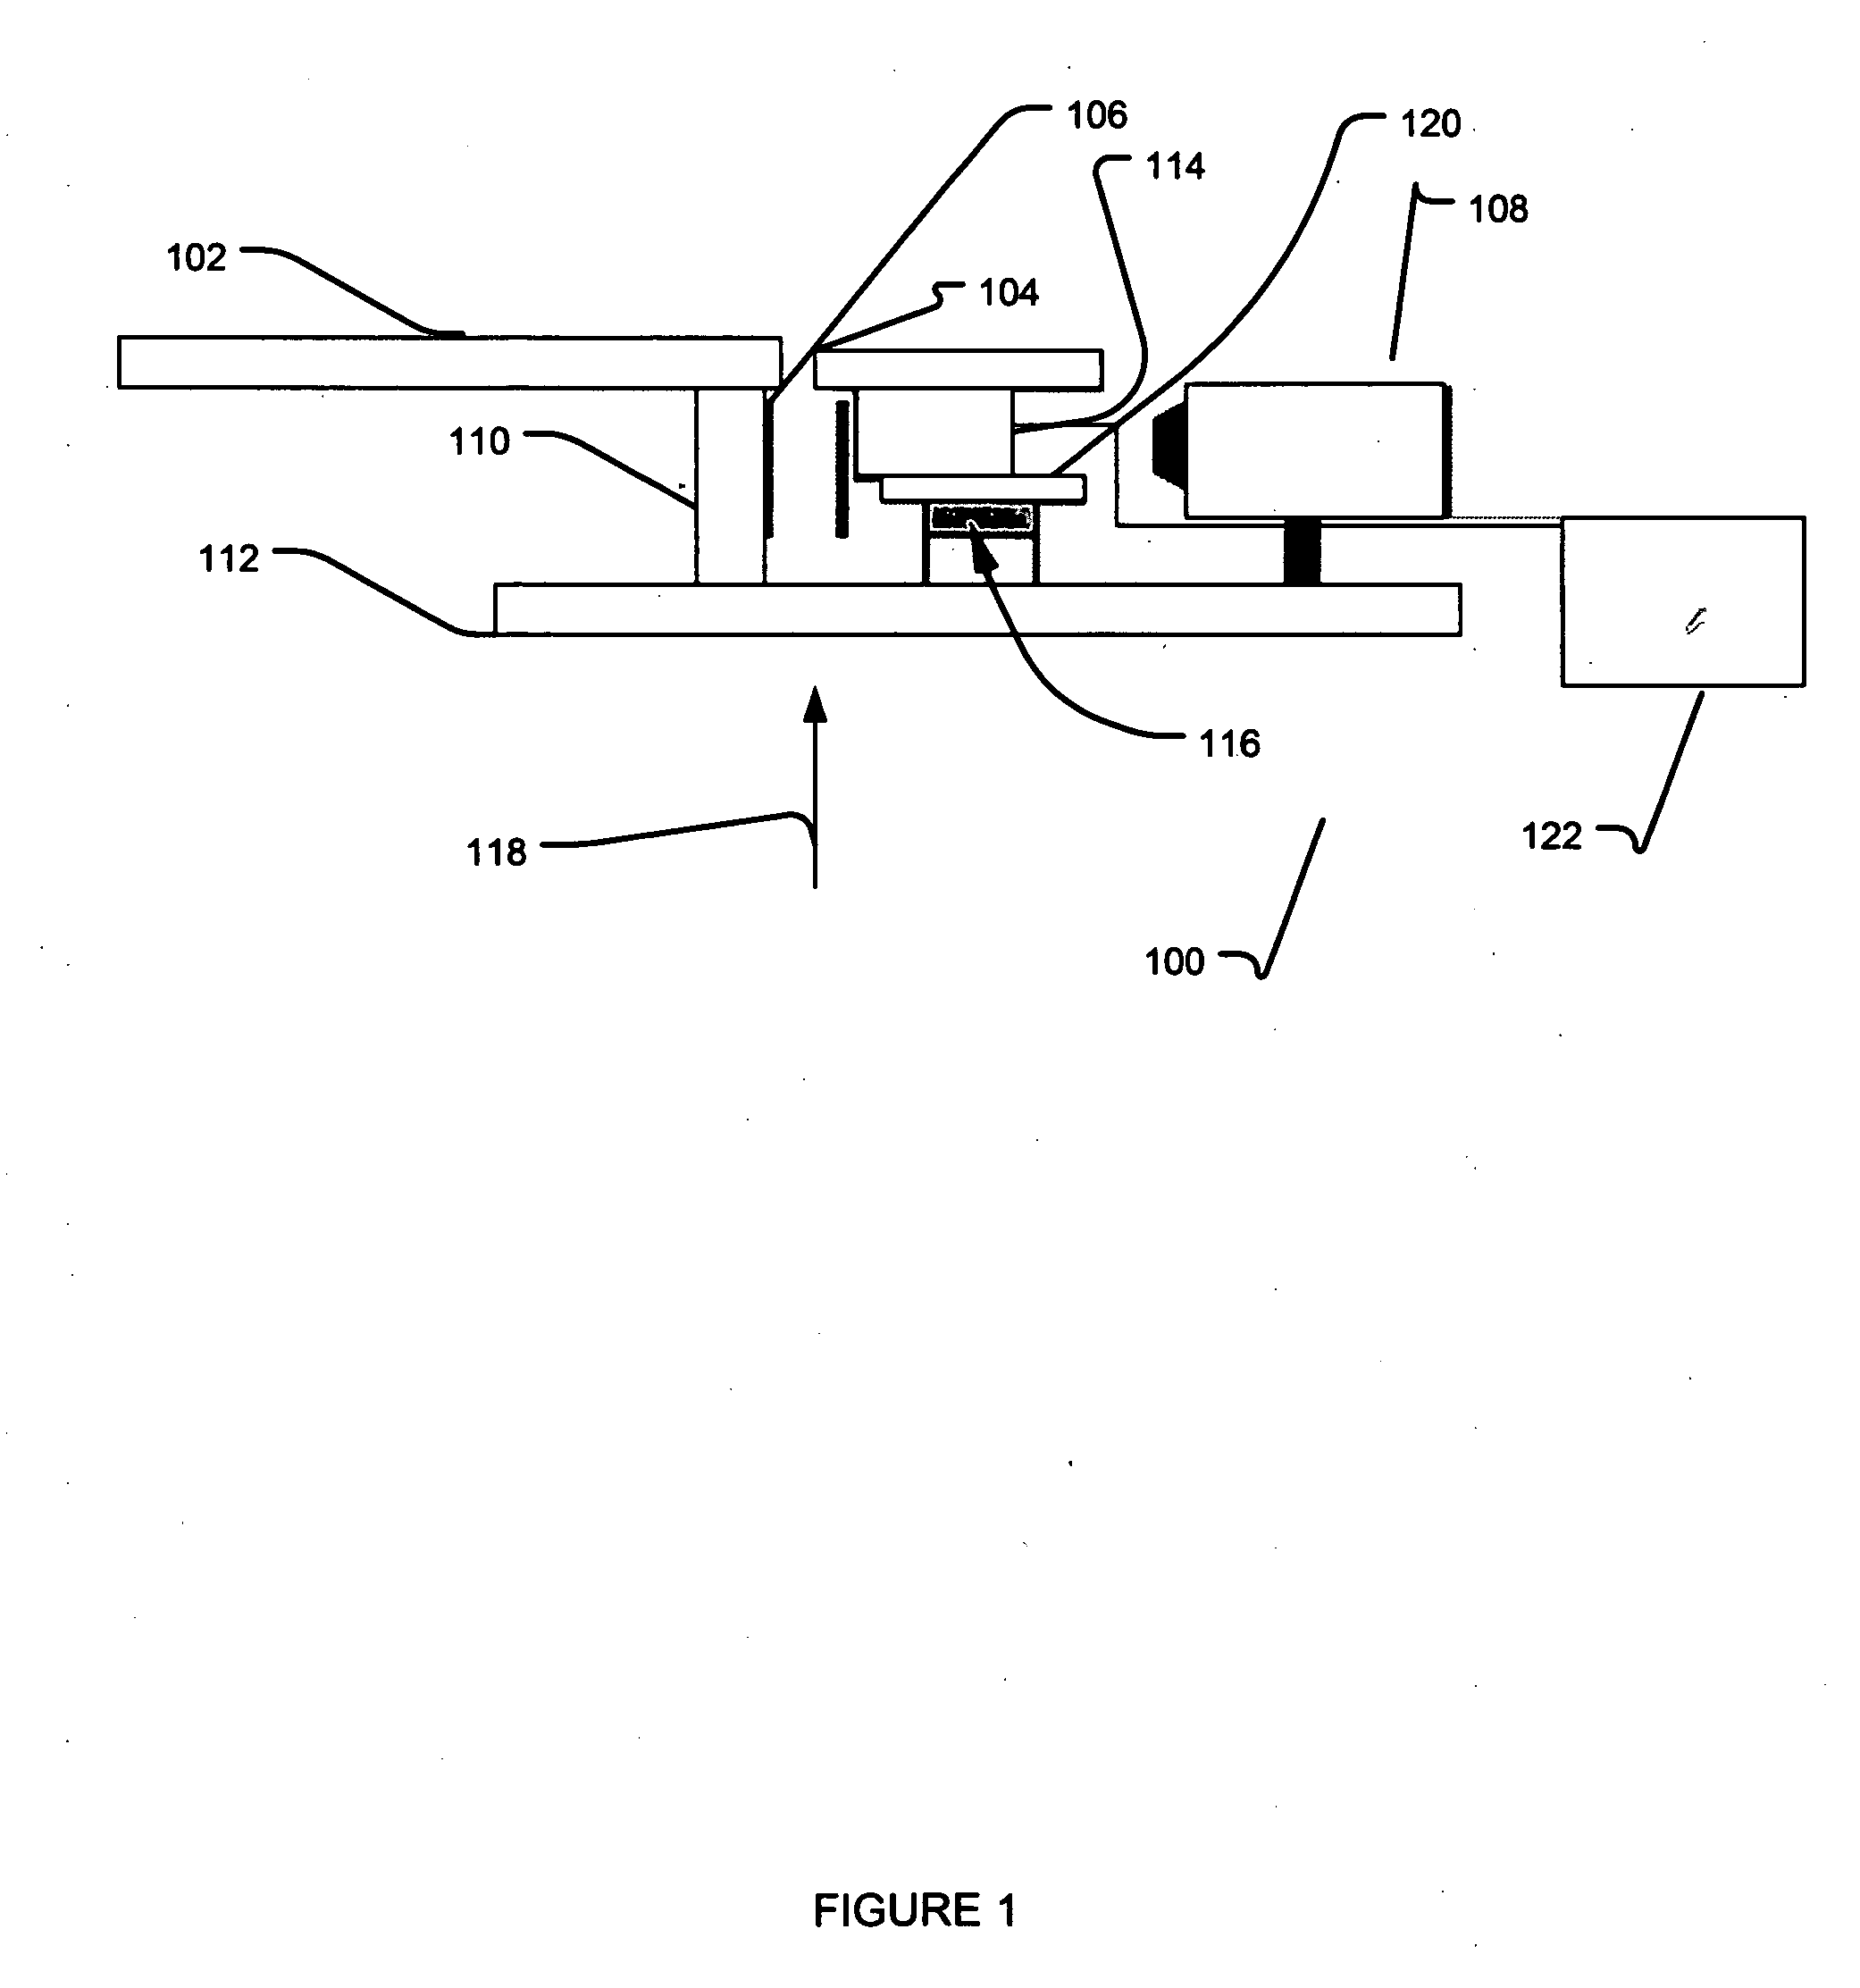 Opposed view and dual head detector apparatus for diagnosis and biopsy with image processing methods